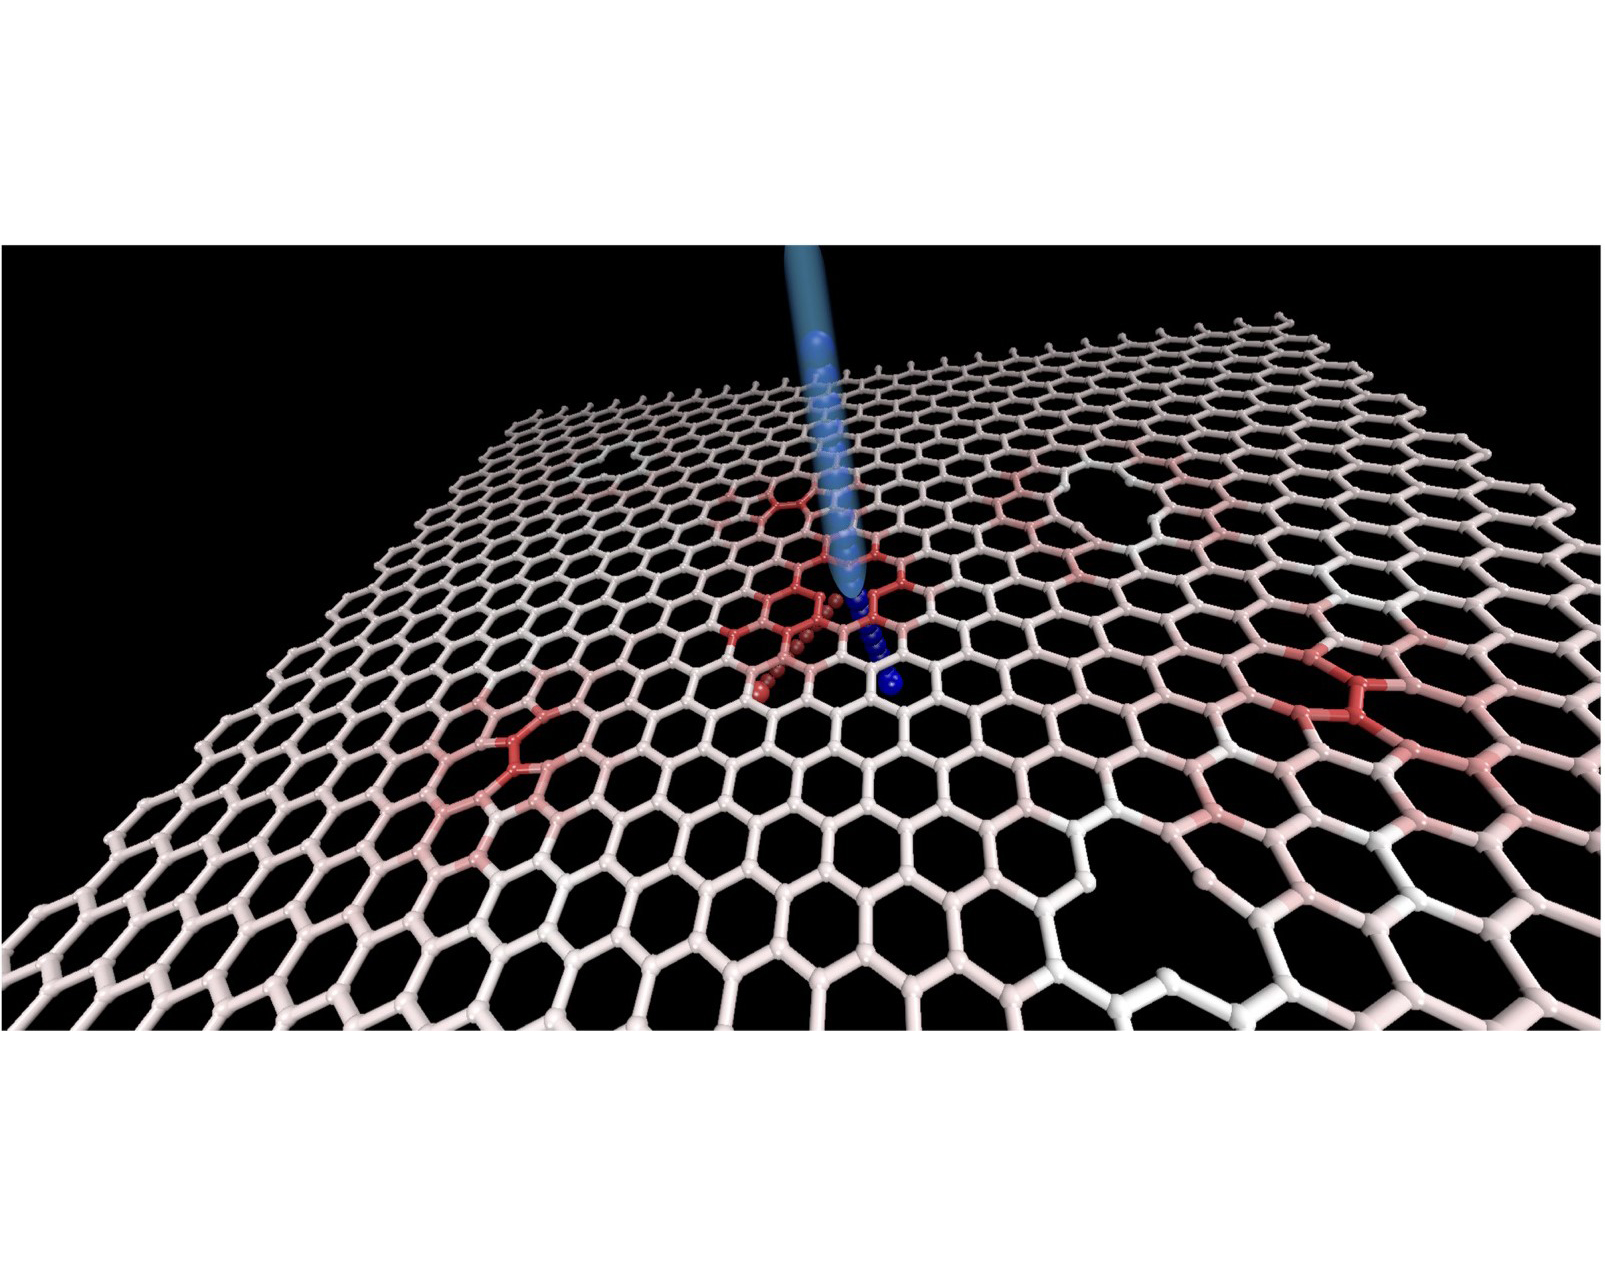 Simulations Show How to Turn Graphene's Defects into Assets | ORNL